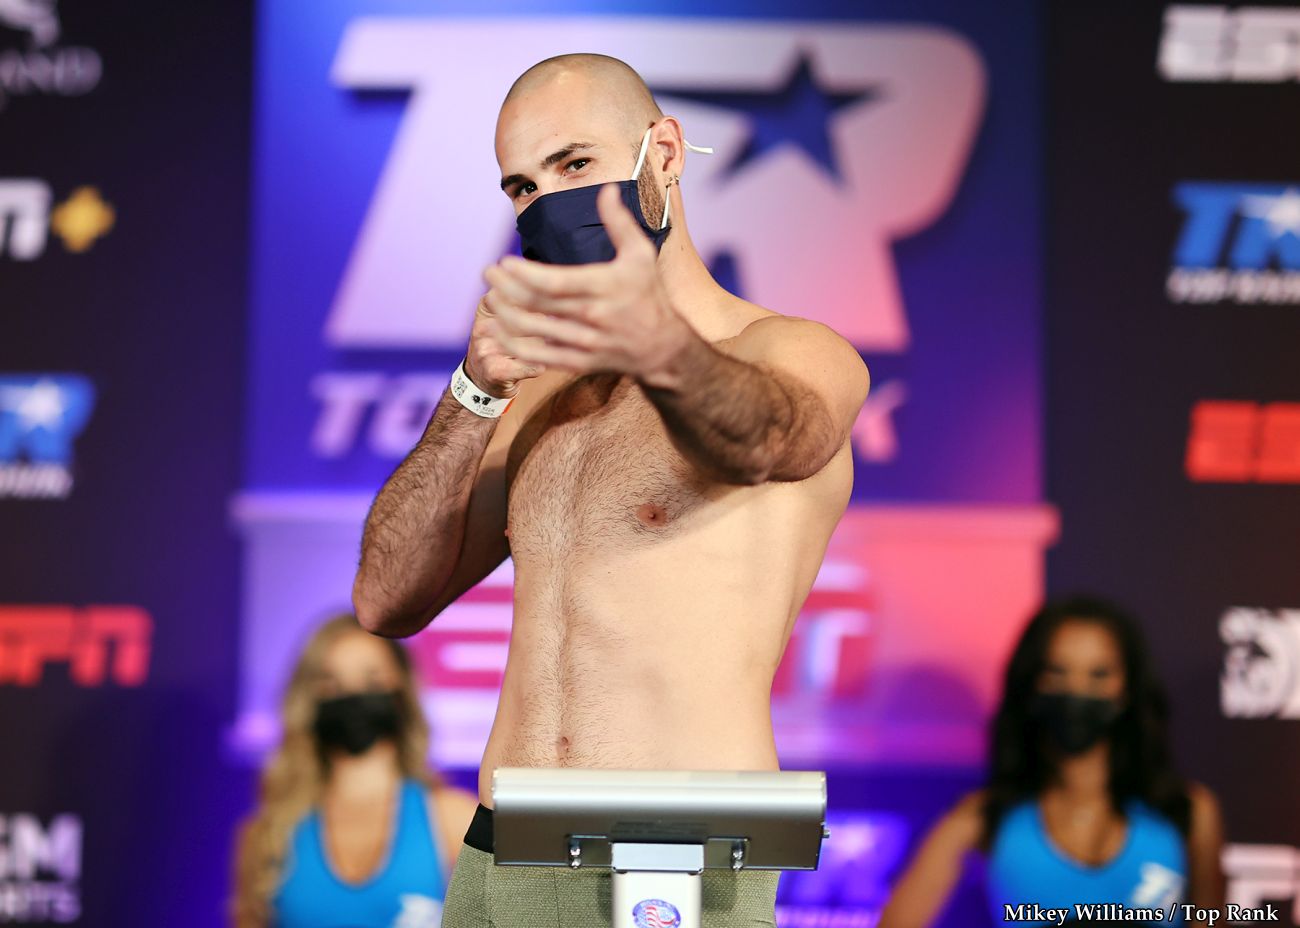 Jose Pedraza tests positive for COVID, Jose Ramirez fight moved to March 4th in Fresno, CA